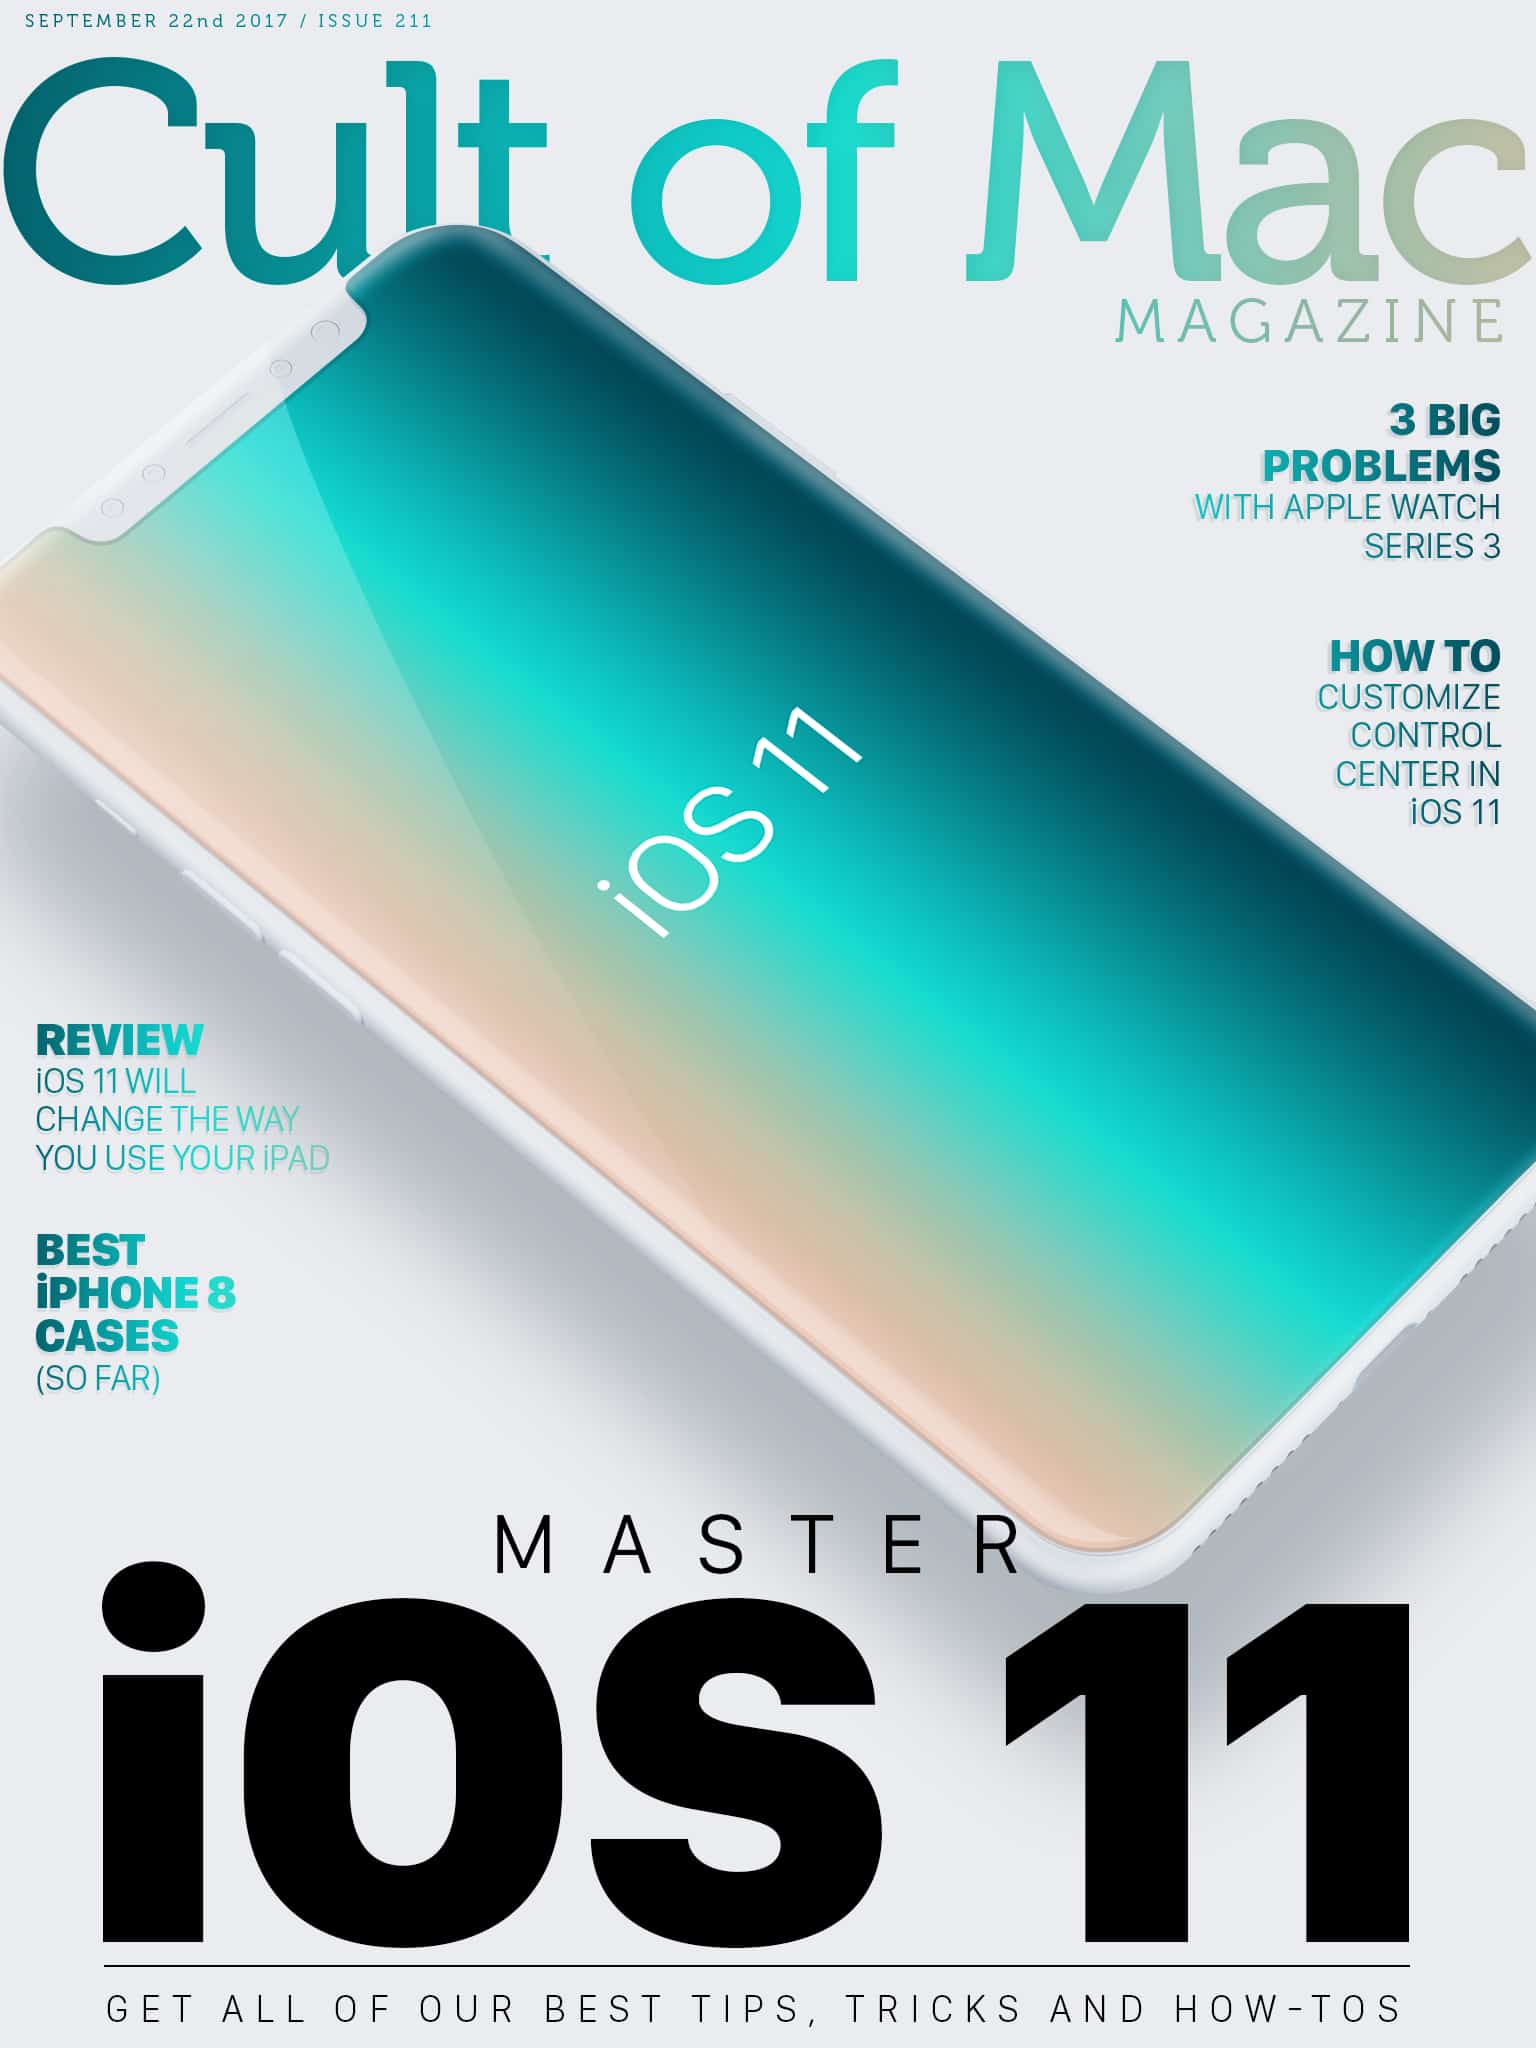 Cult of Mac Magazine: Everything you need to know about iOS 11